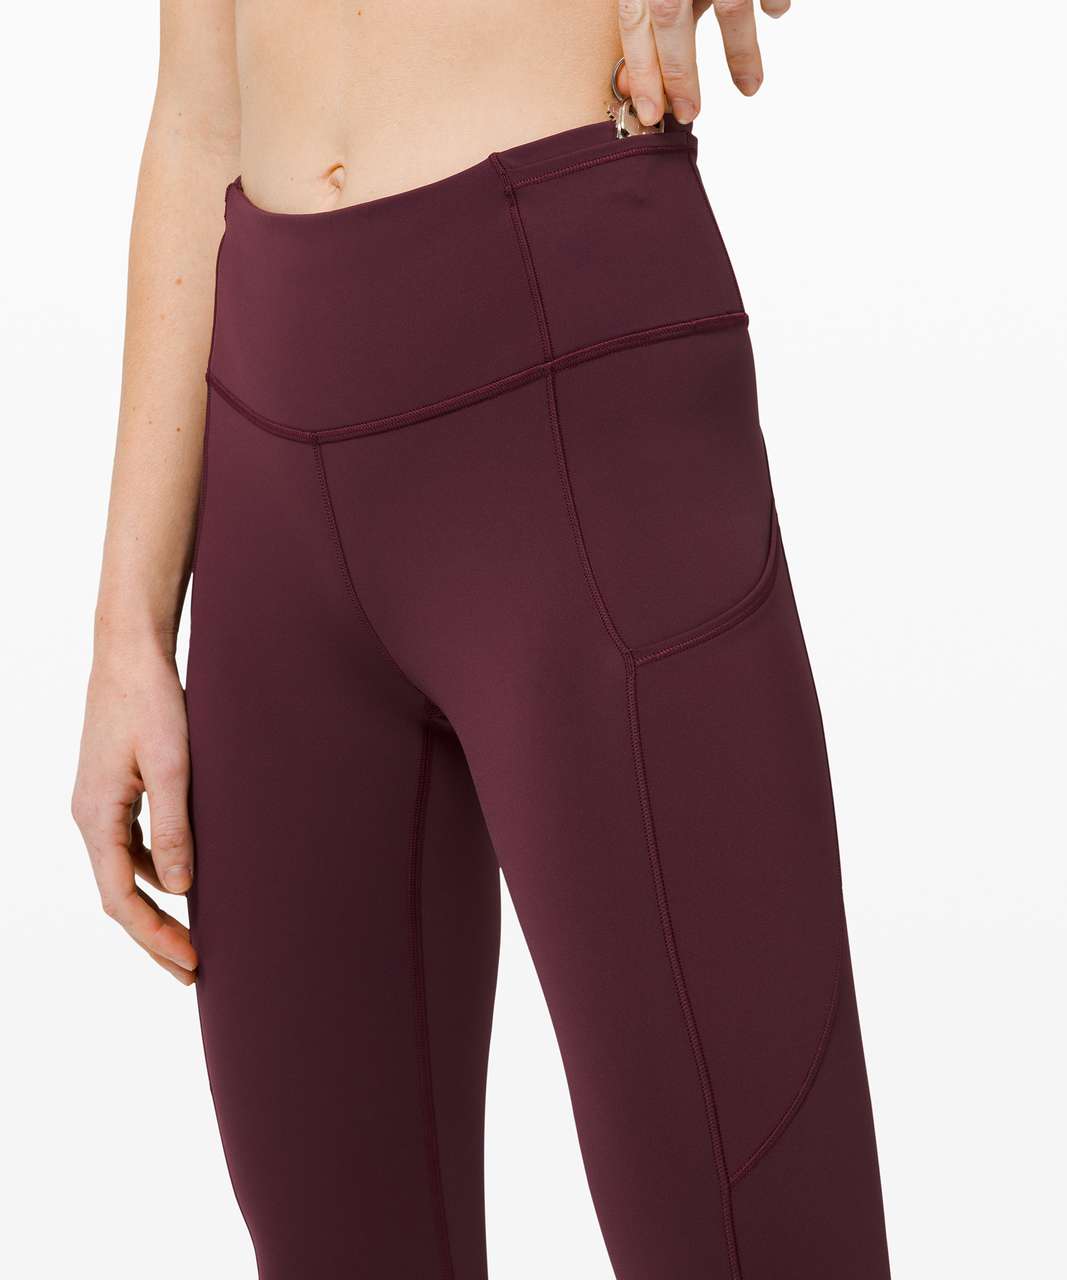 Lululemon Fast and Free High-Rise Crop II 23" *Non-Reflective - Cassis